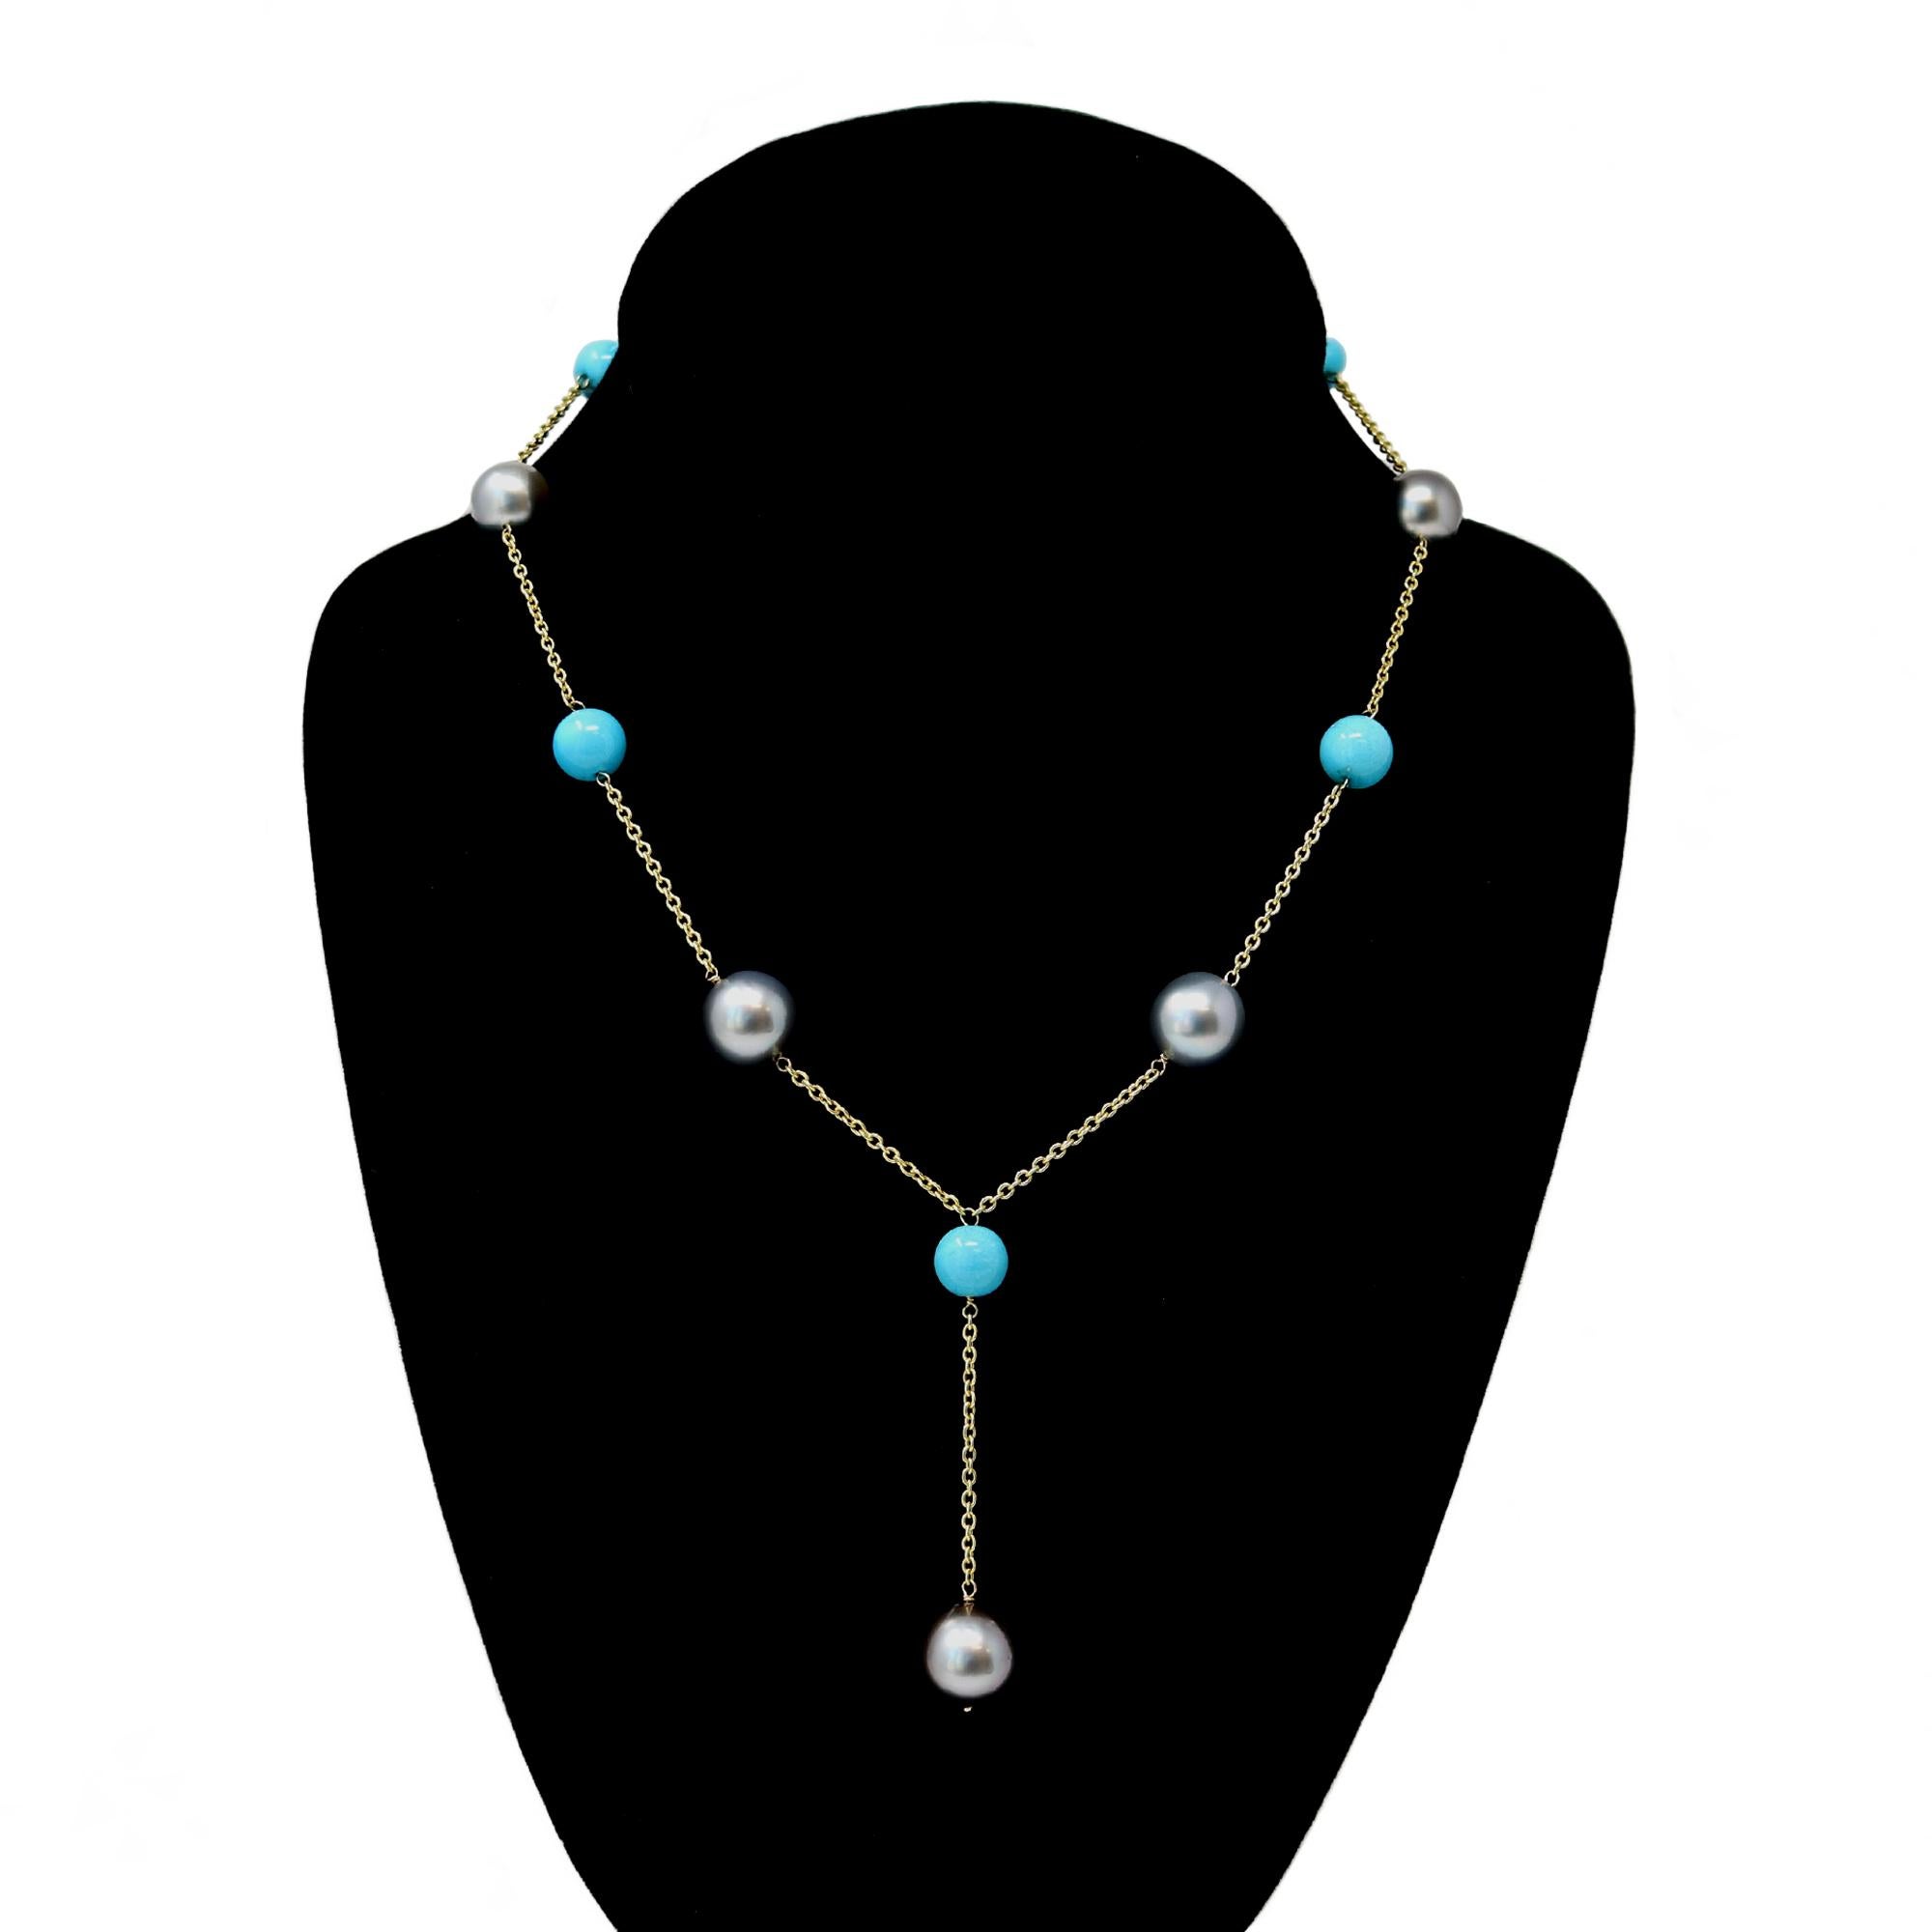 A lariat style necklace designed by Rosaria Varra featuring alternating Tahitian pearl and turquoise beads. The light grey tahitian pearls are round shape with excellent luster and minor surface inclusions, ranging from 10 to 12 millimeter in